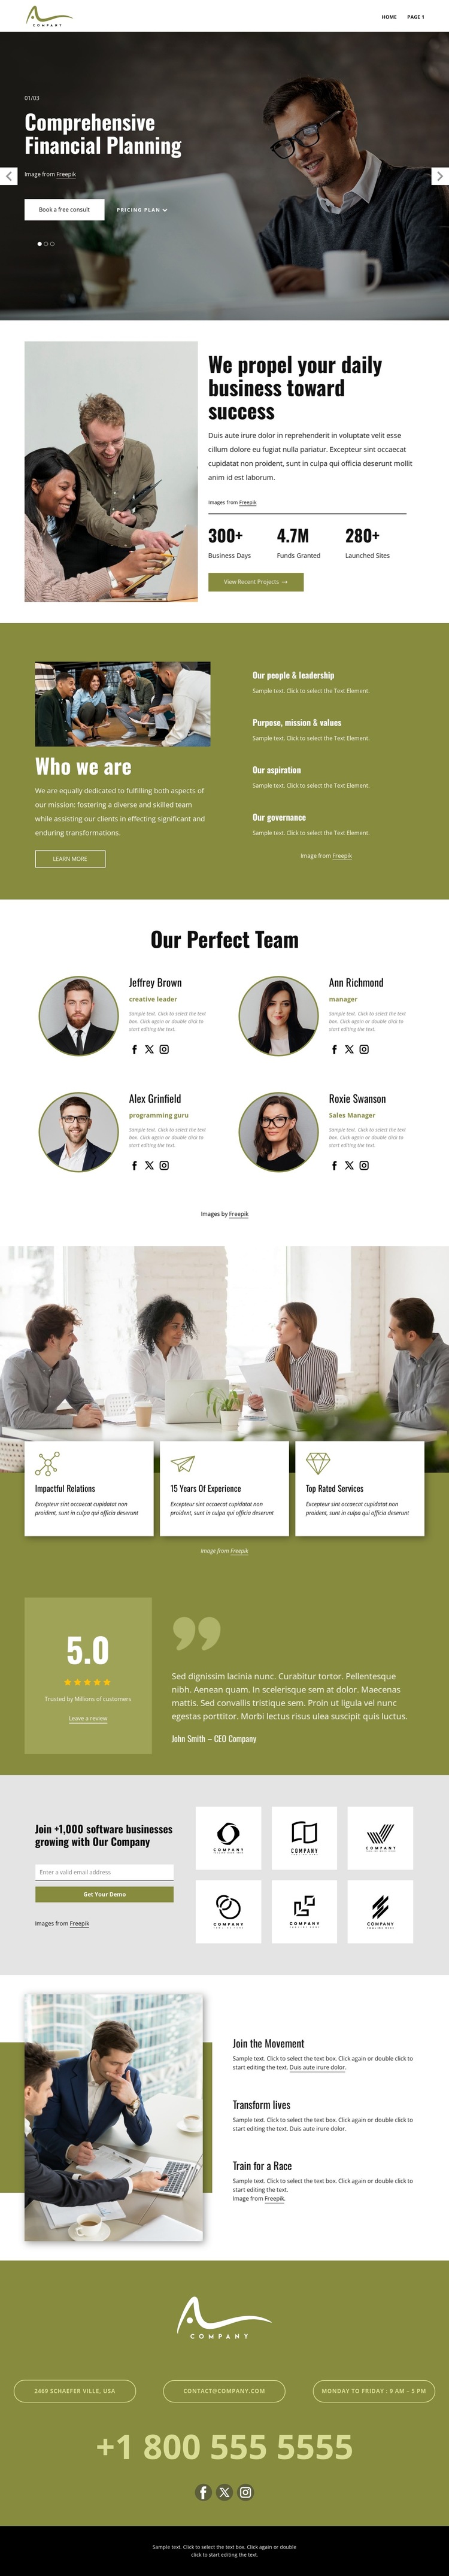 Strategic consulting solutions HTML5 Template